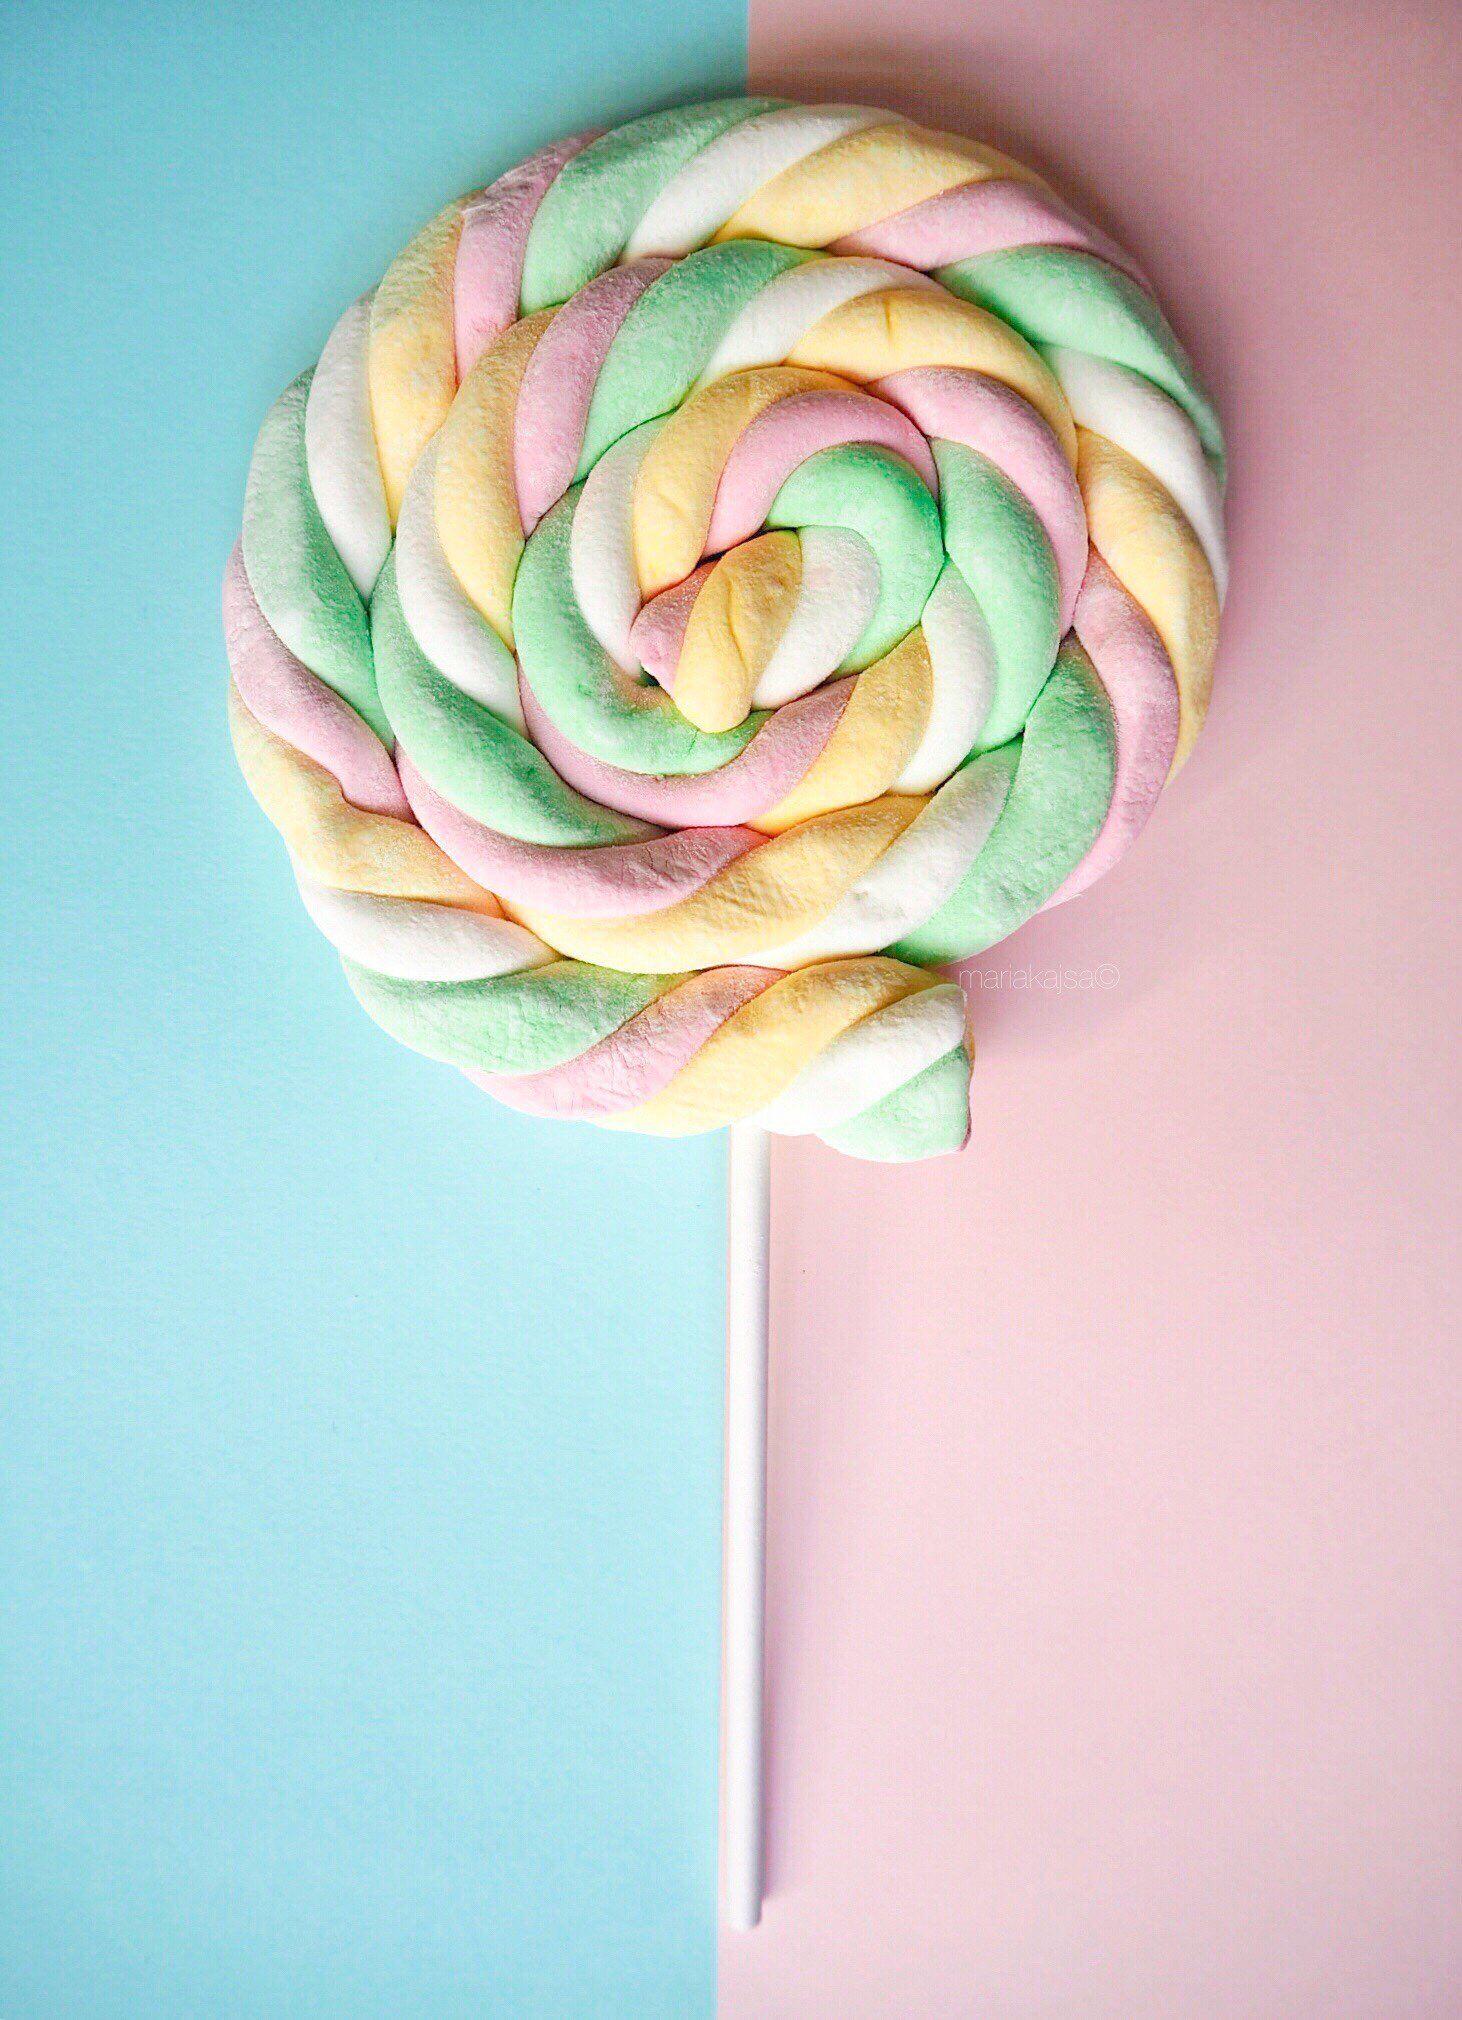 iPhone and Android Wallpaper: Pastel Candy Lollipop